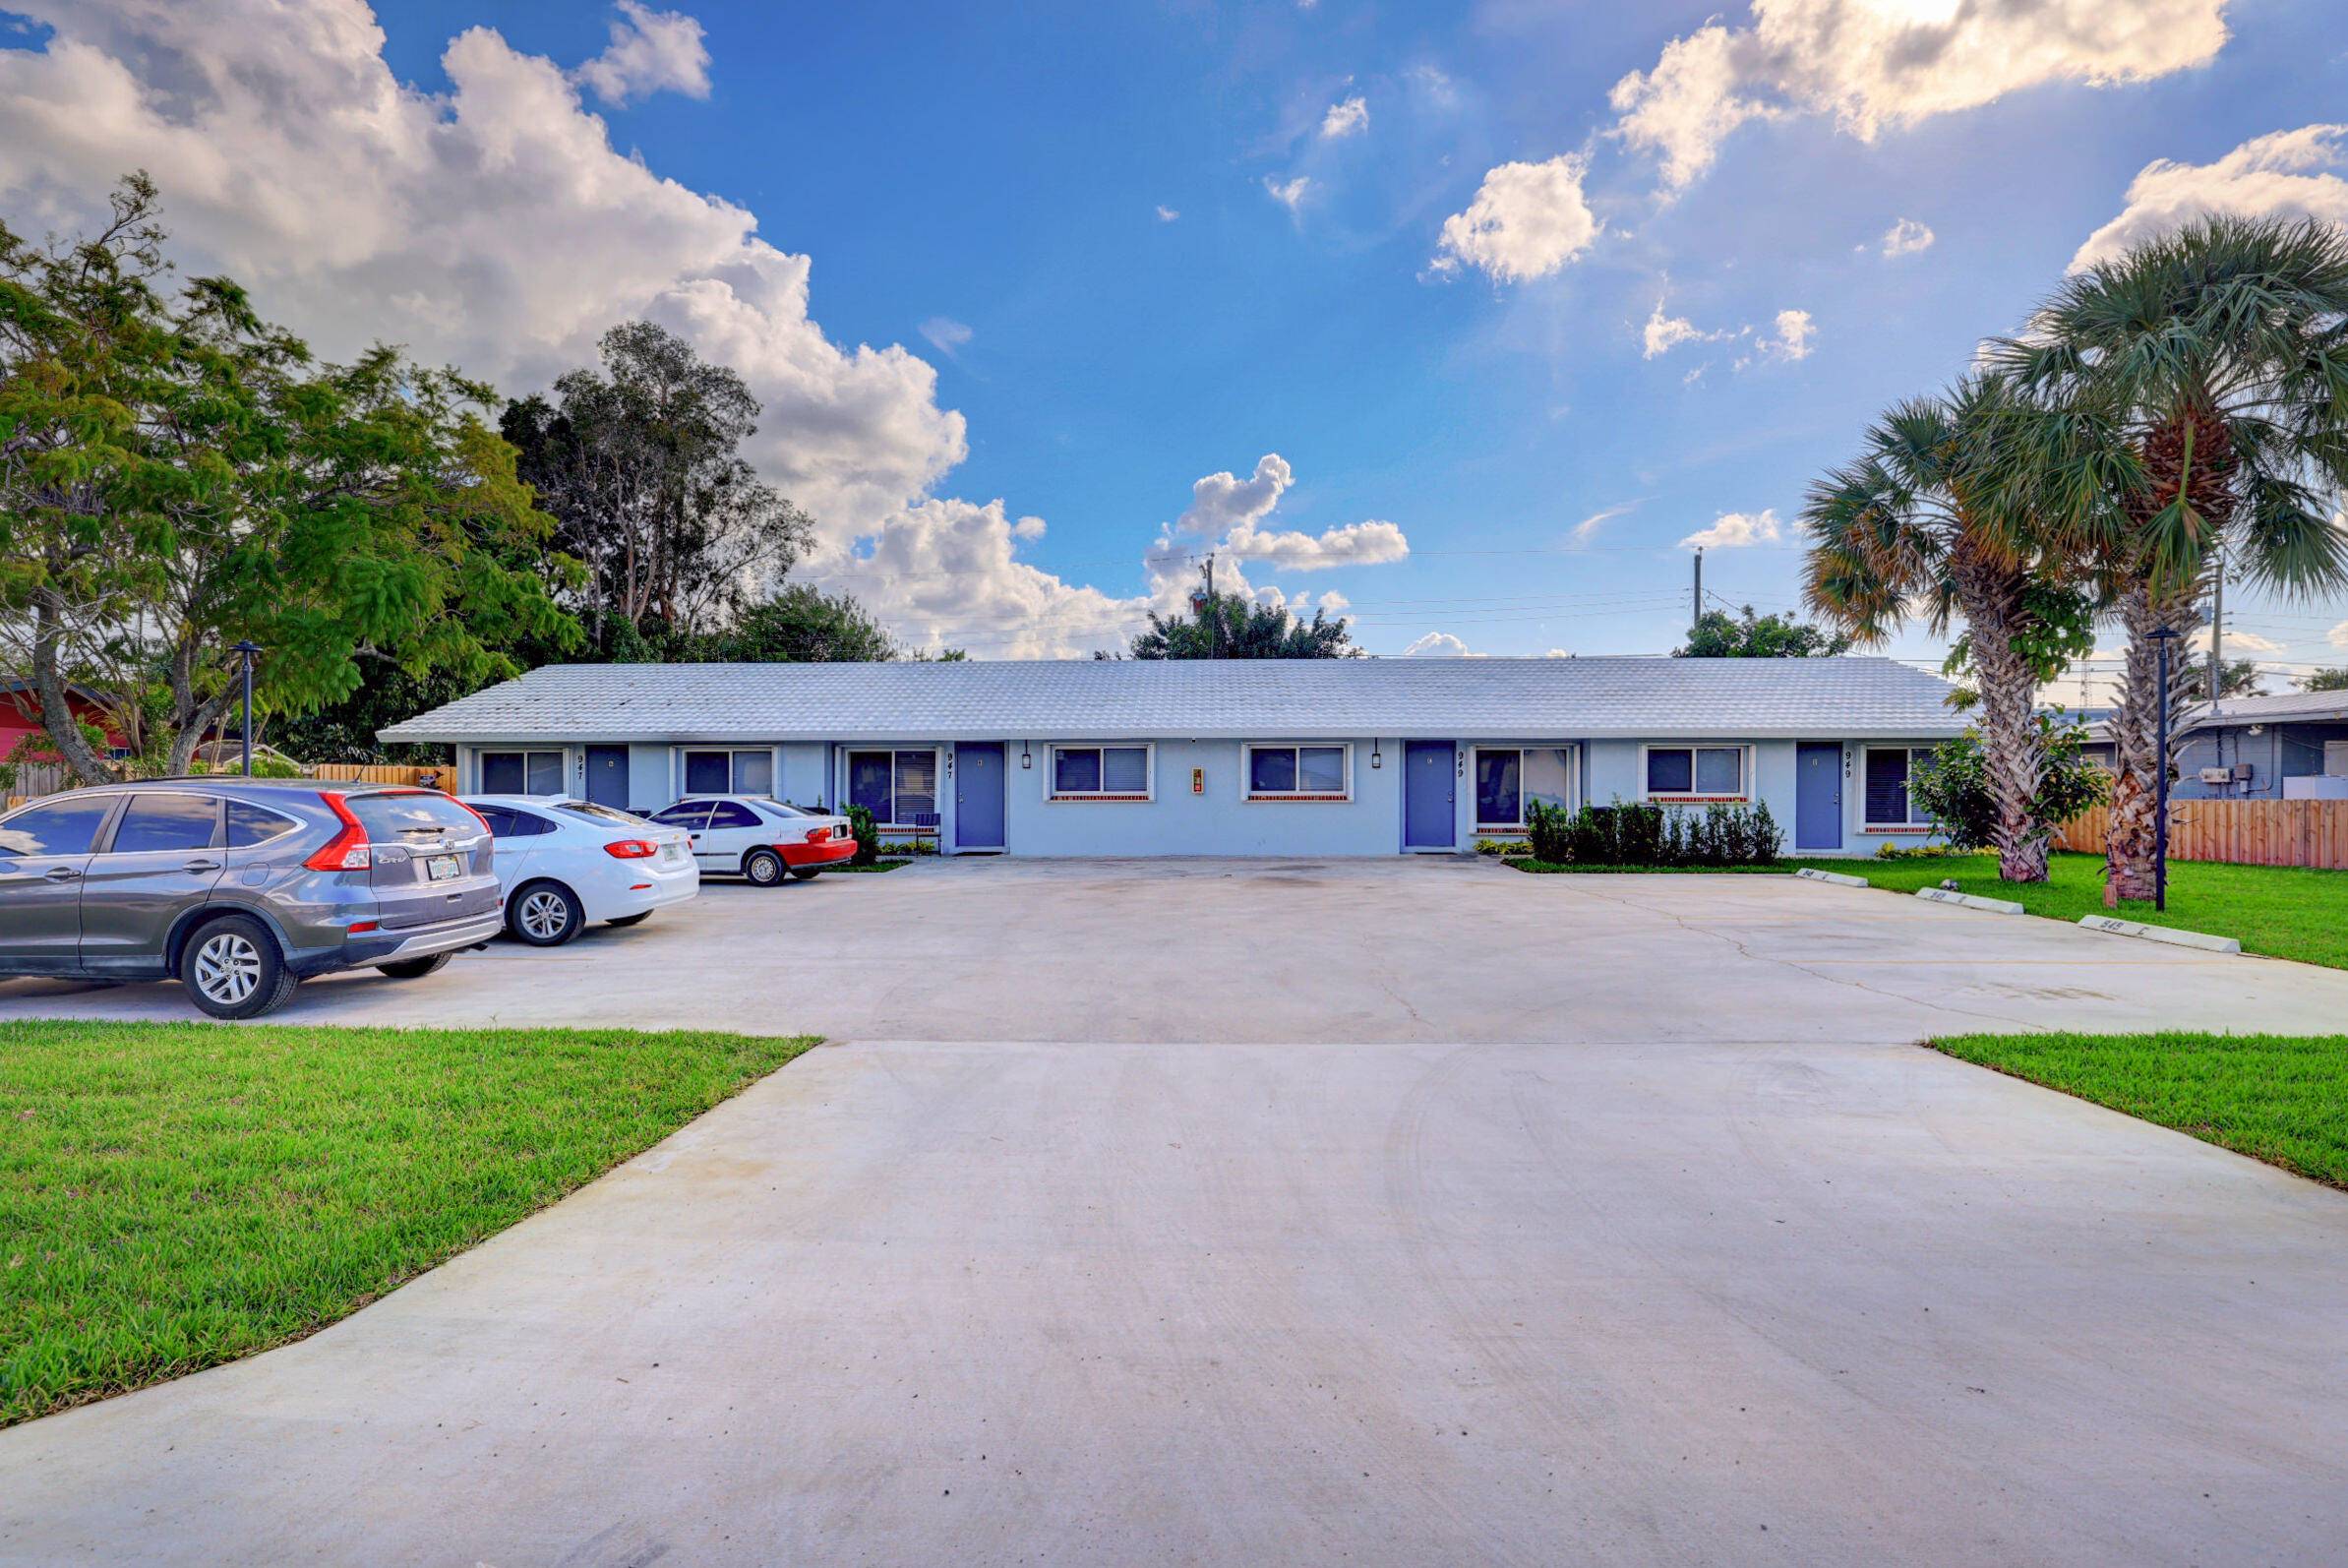 Great investment opportunity in upcoming Fort Pierce area.